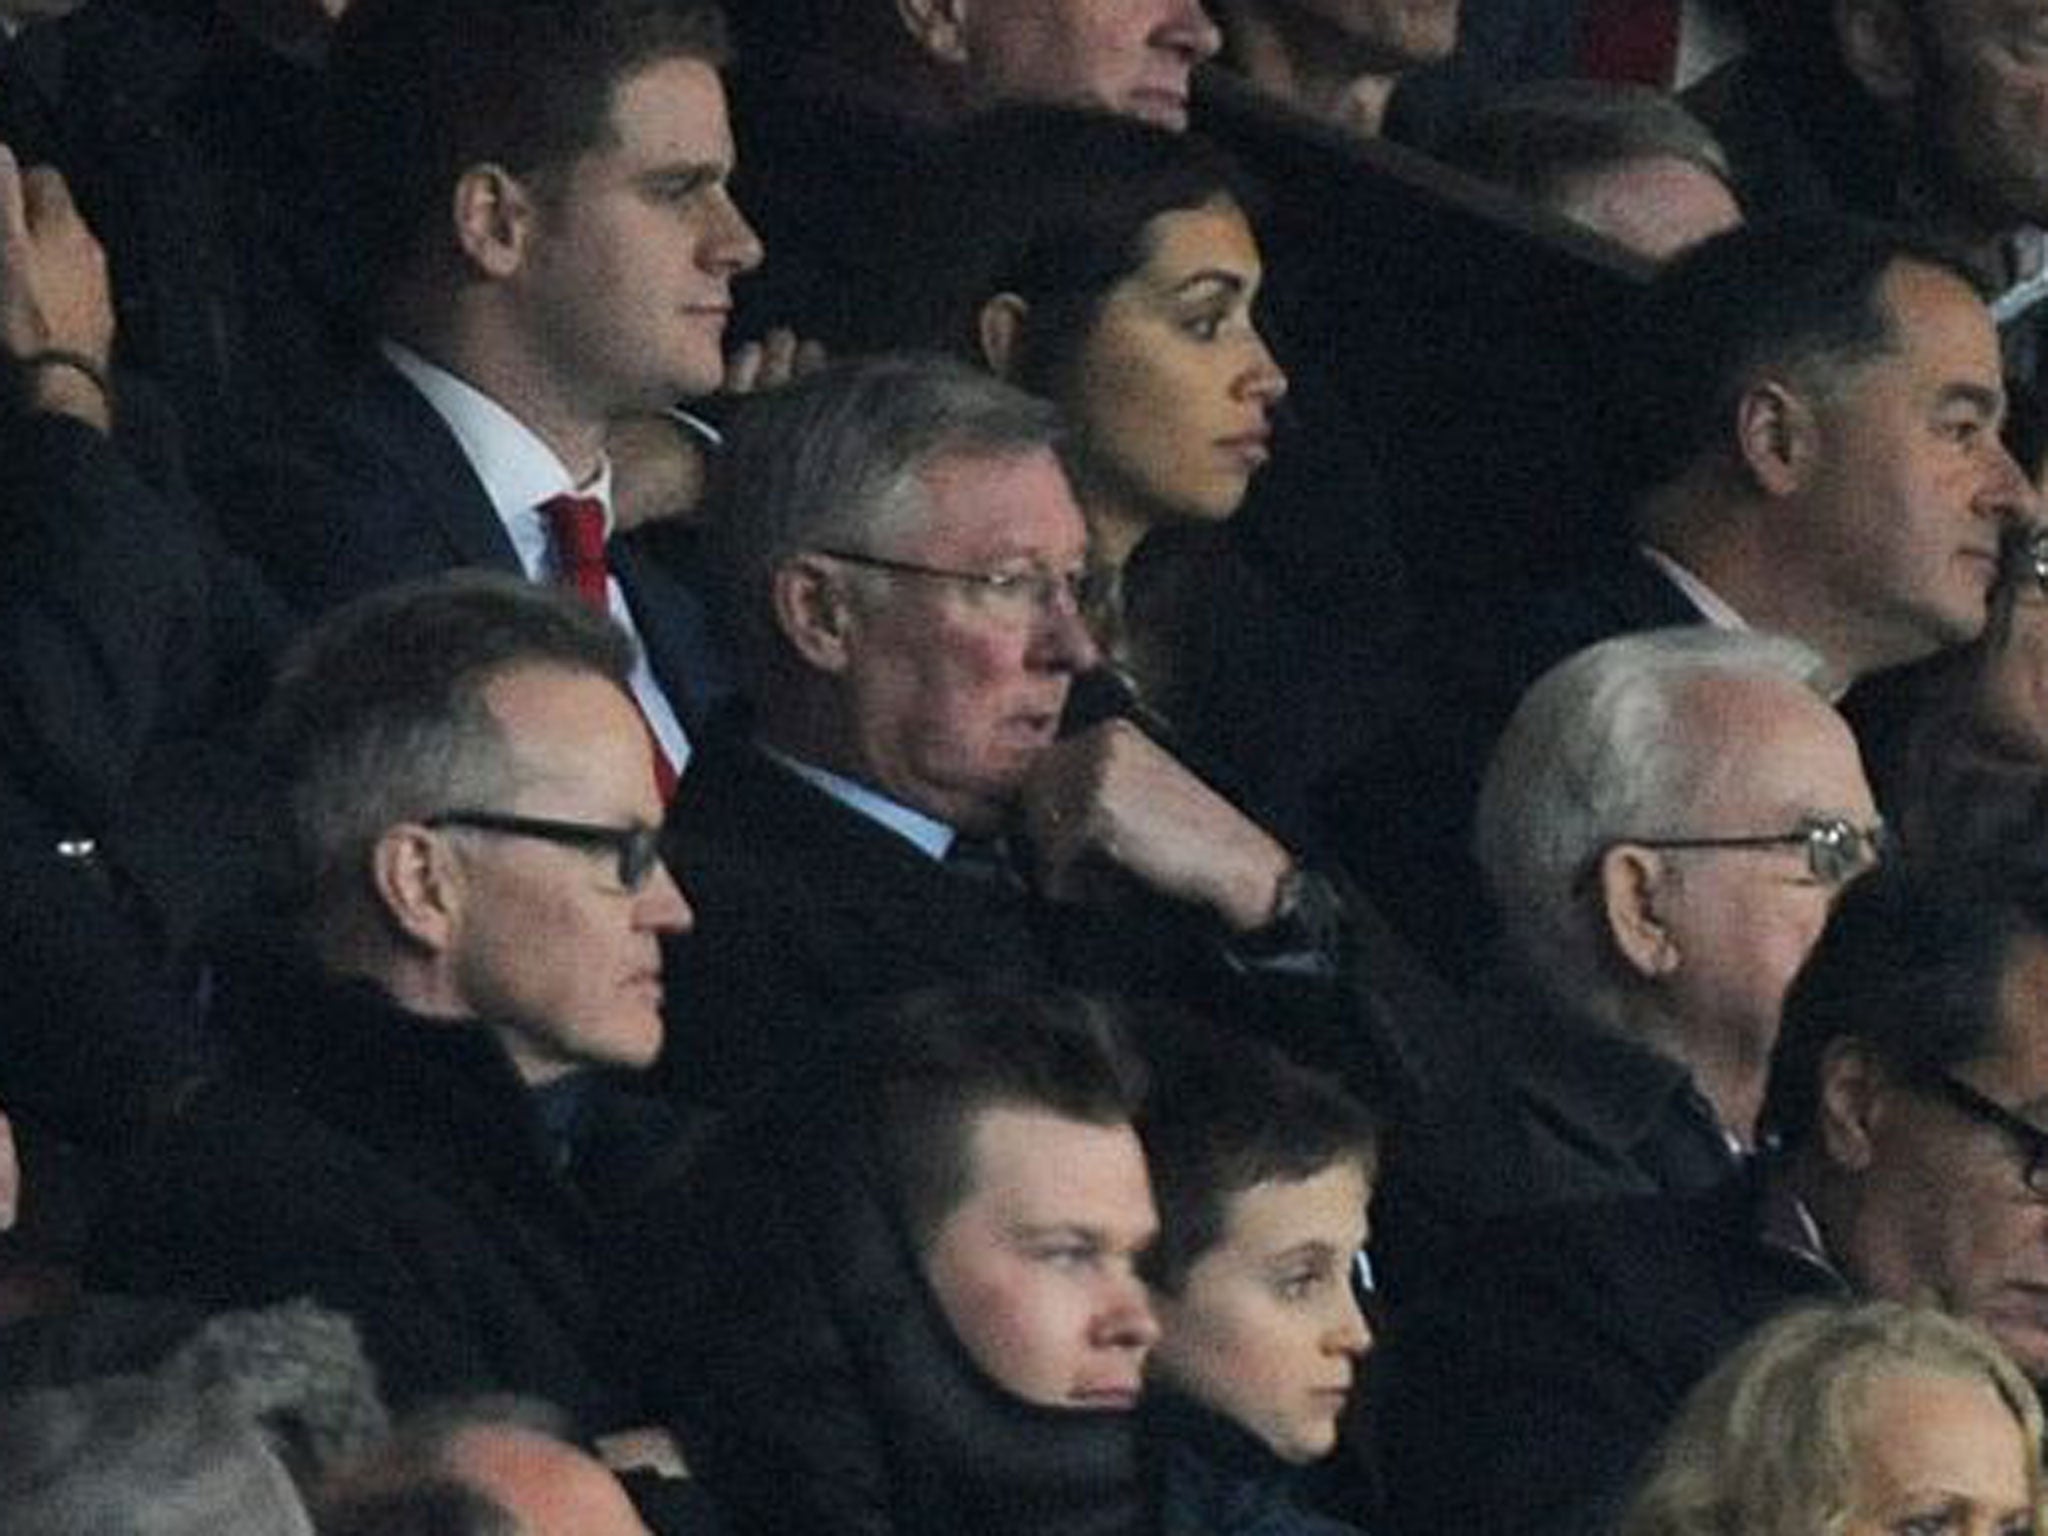 Sir Alex Ferguson looks on at Old Trafford during Manchester United's 3-0 defeat by Manchester City